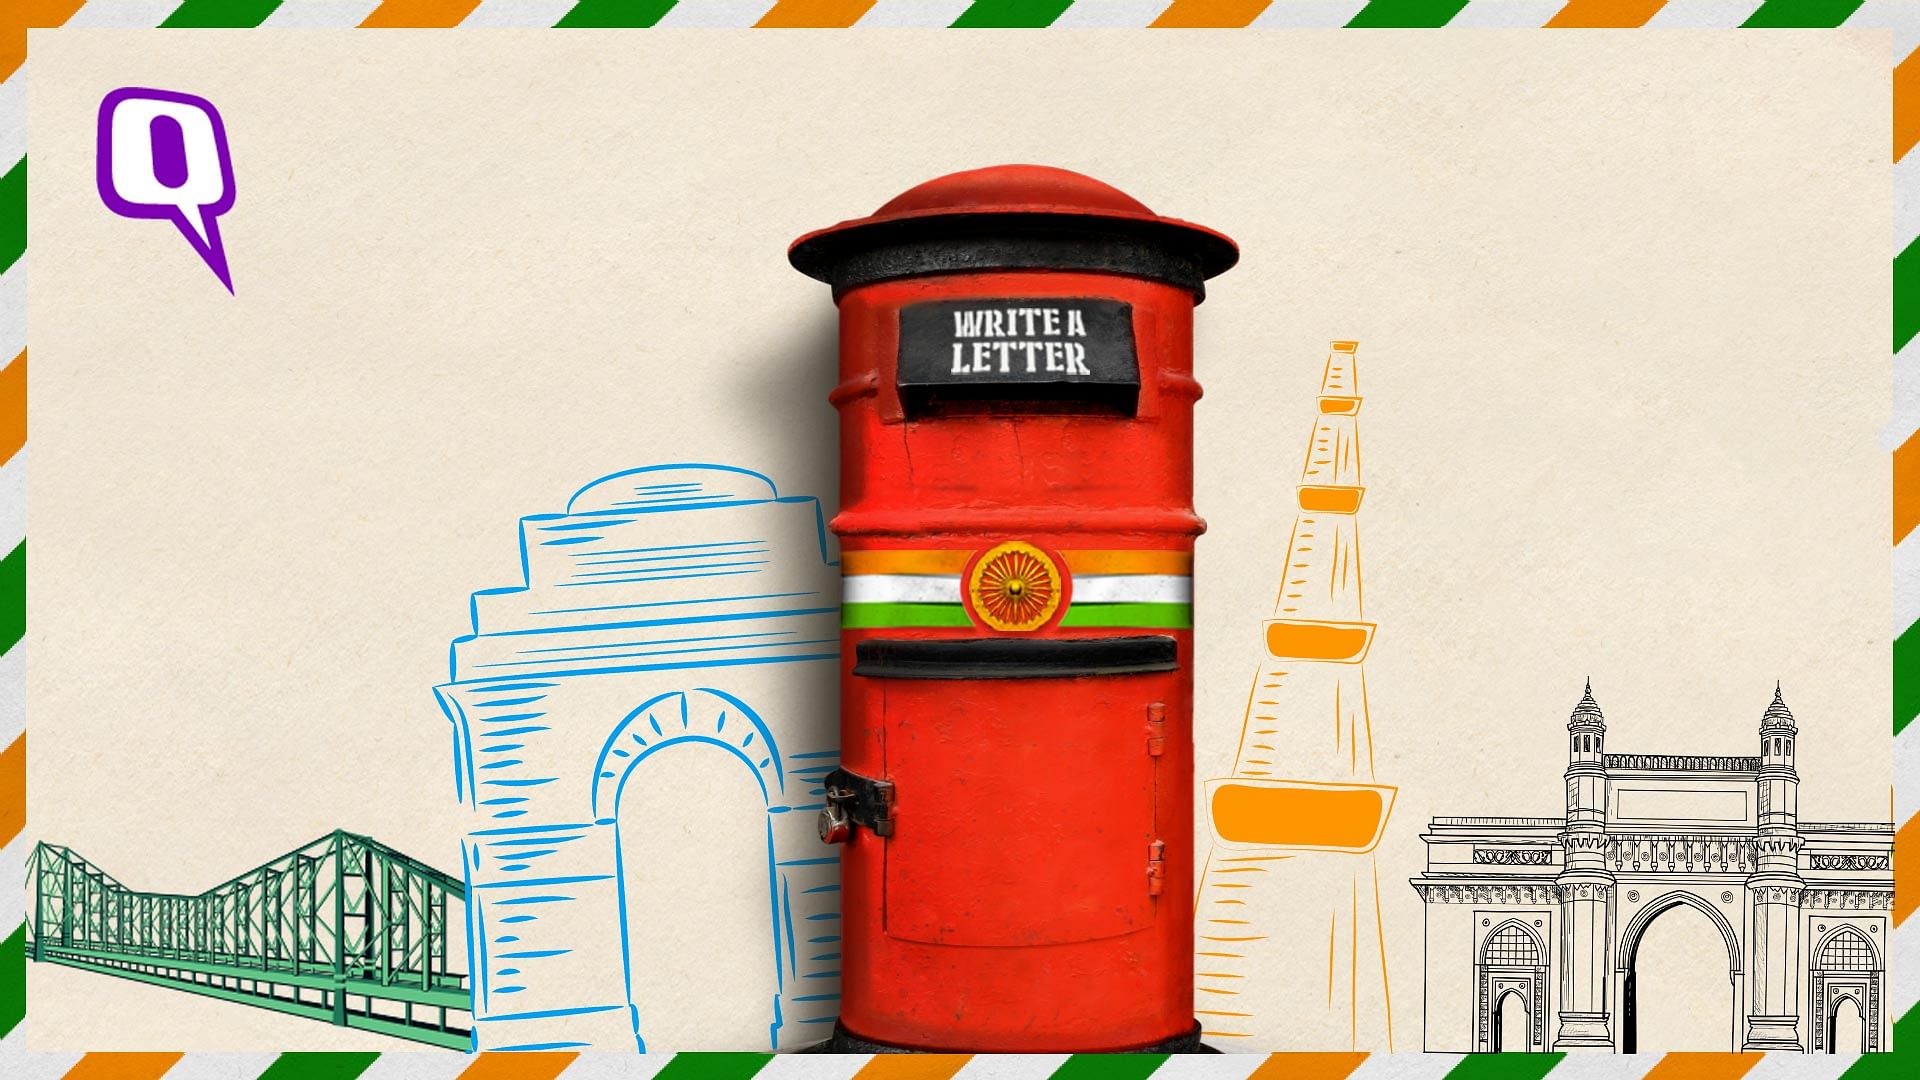 For Republic Day, write a Letter to India, tell her how you feel.&nbsp;